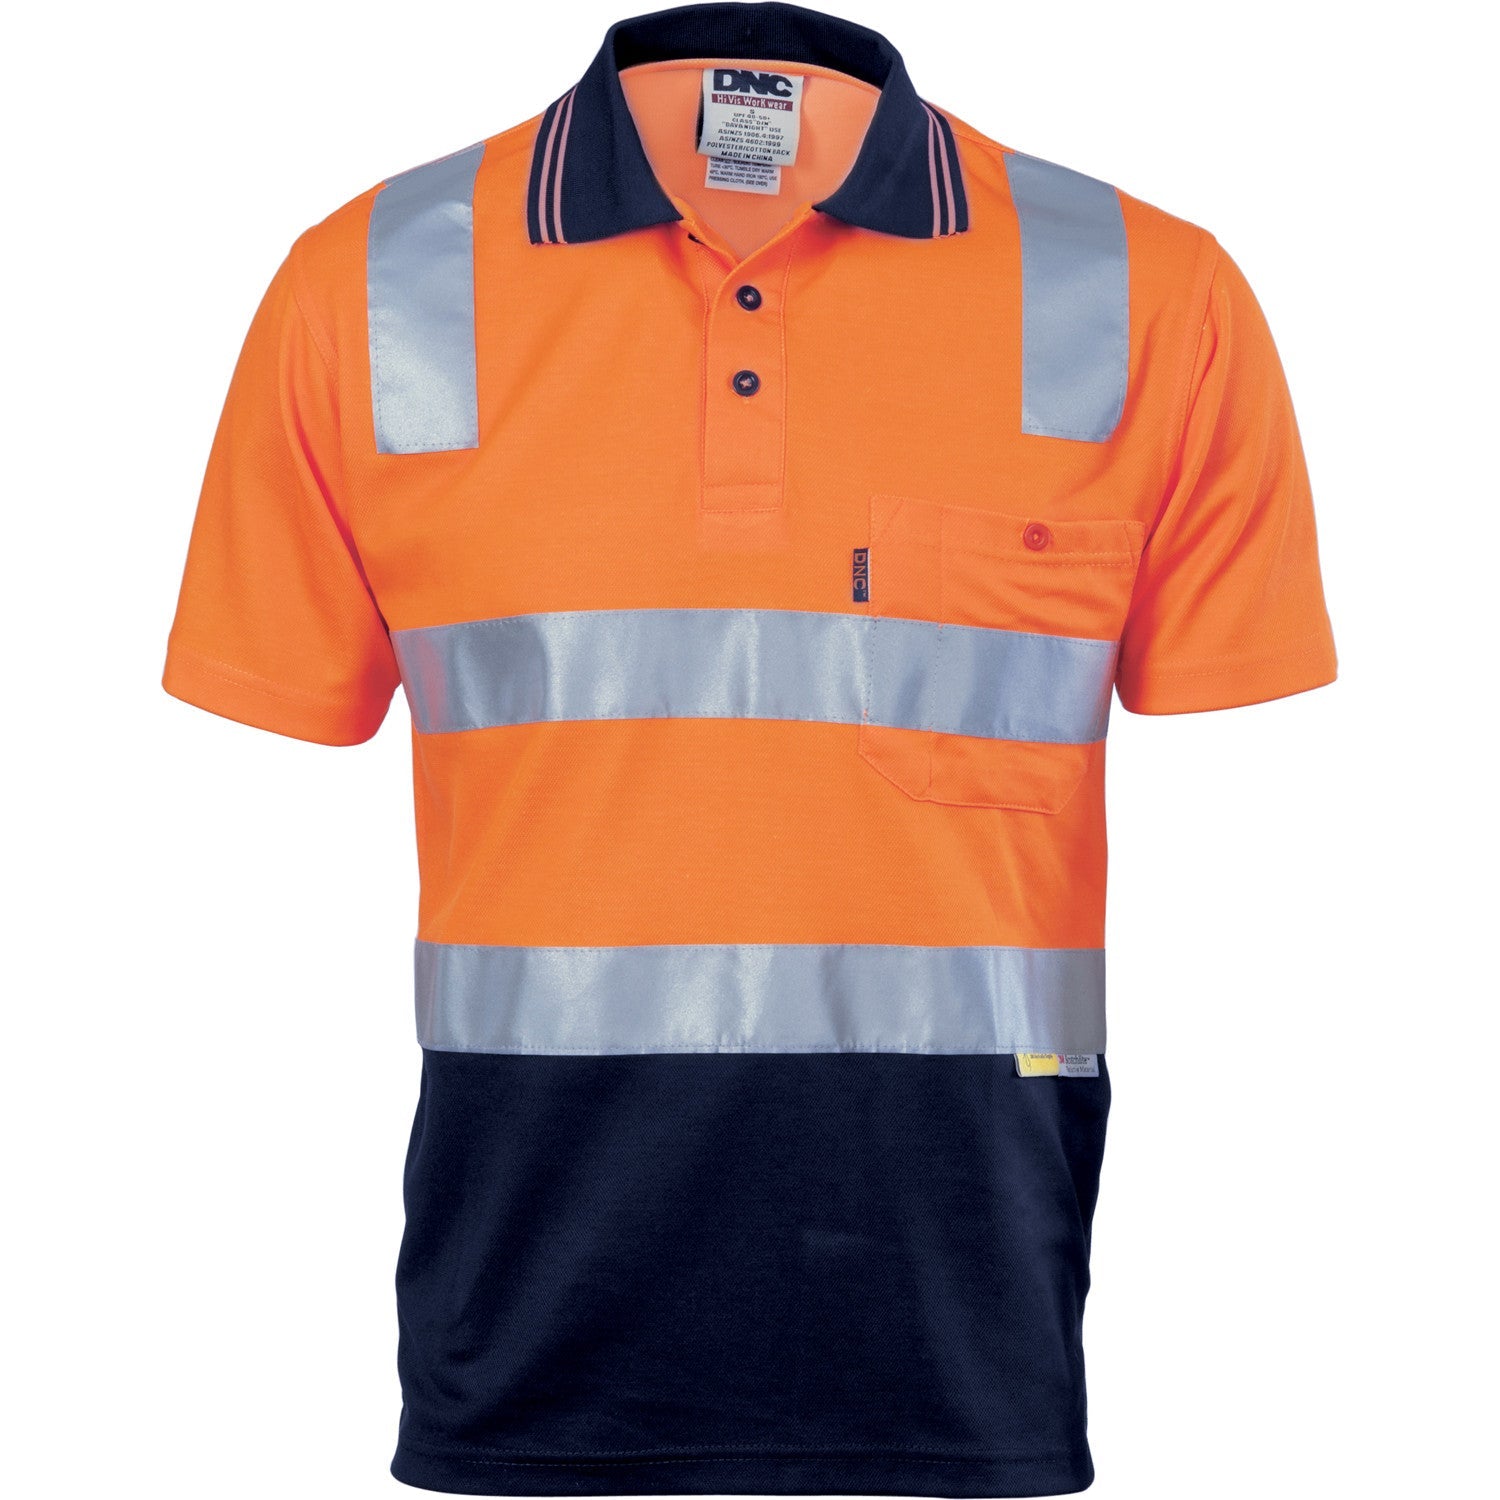 DNC Cotton Back Hivis Two Tone Polo Shirt With Csr R/ Tape - Short Sleeve (3817)